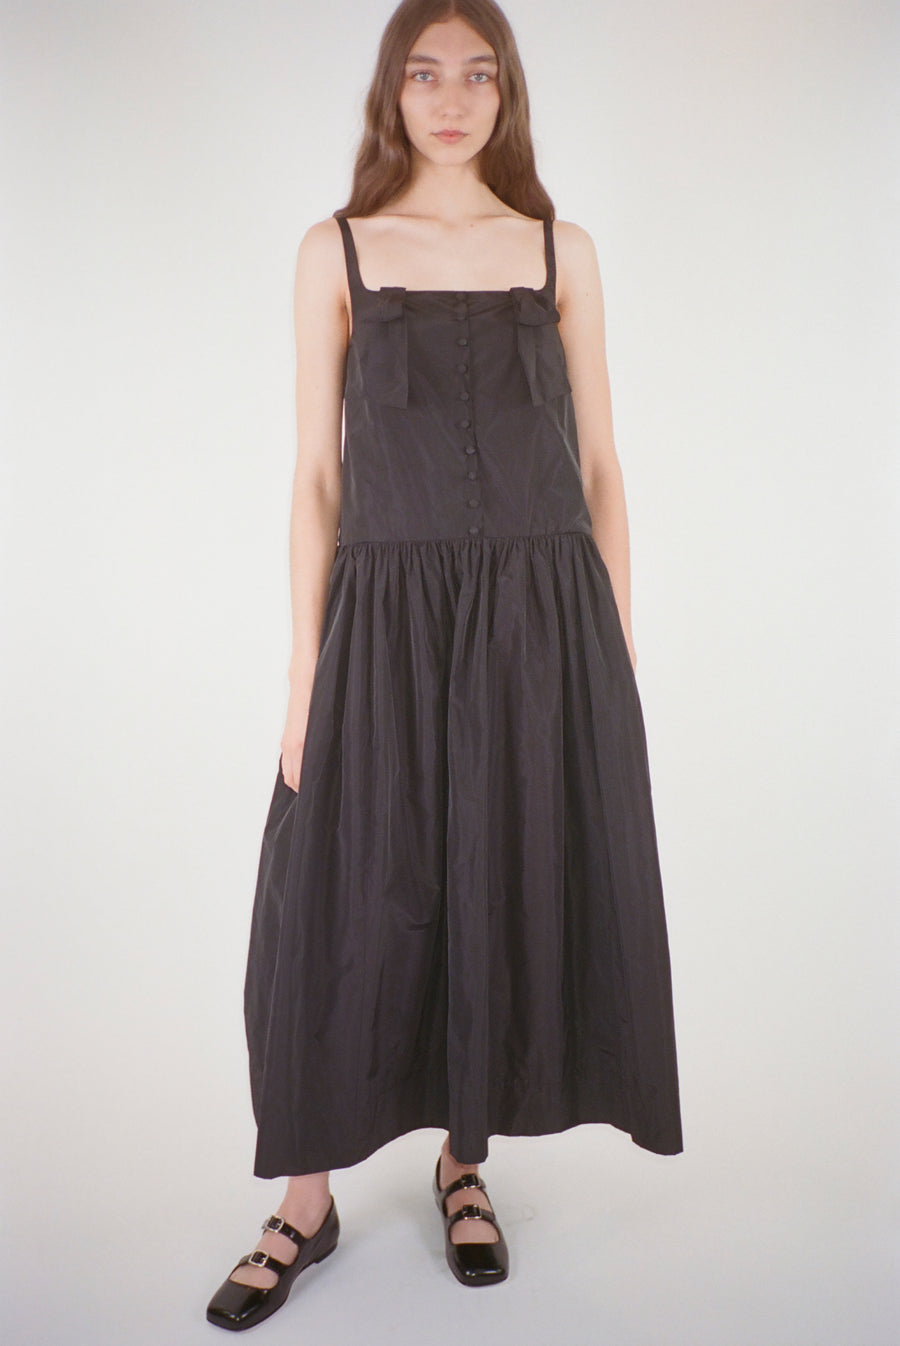 Midi length dress in black taffeta with buttons and cape detail at back on model